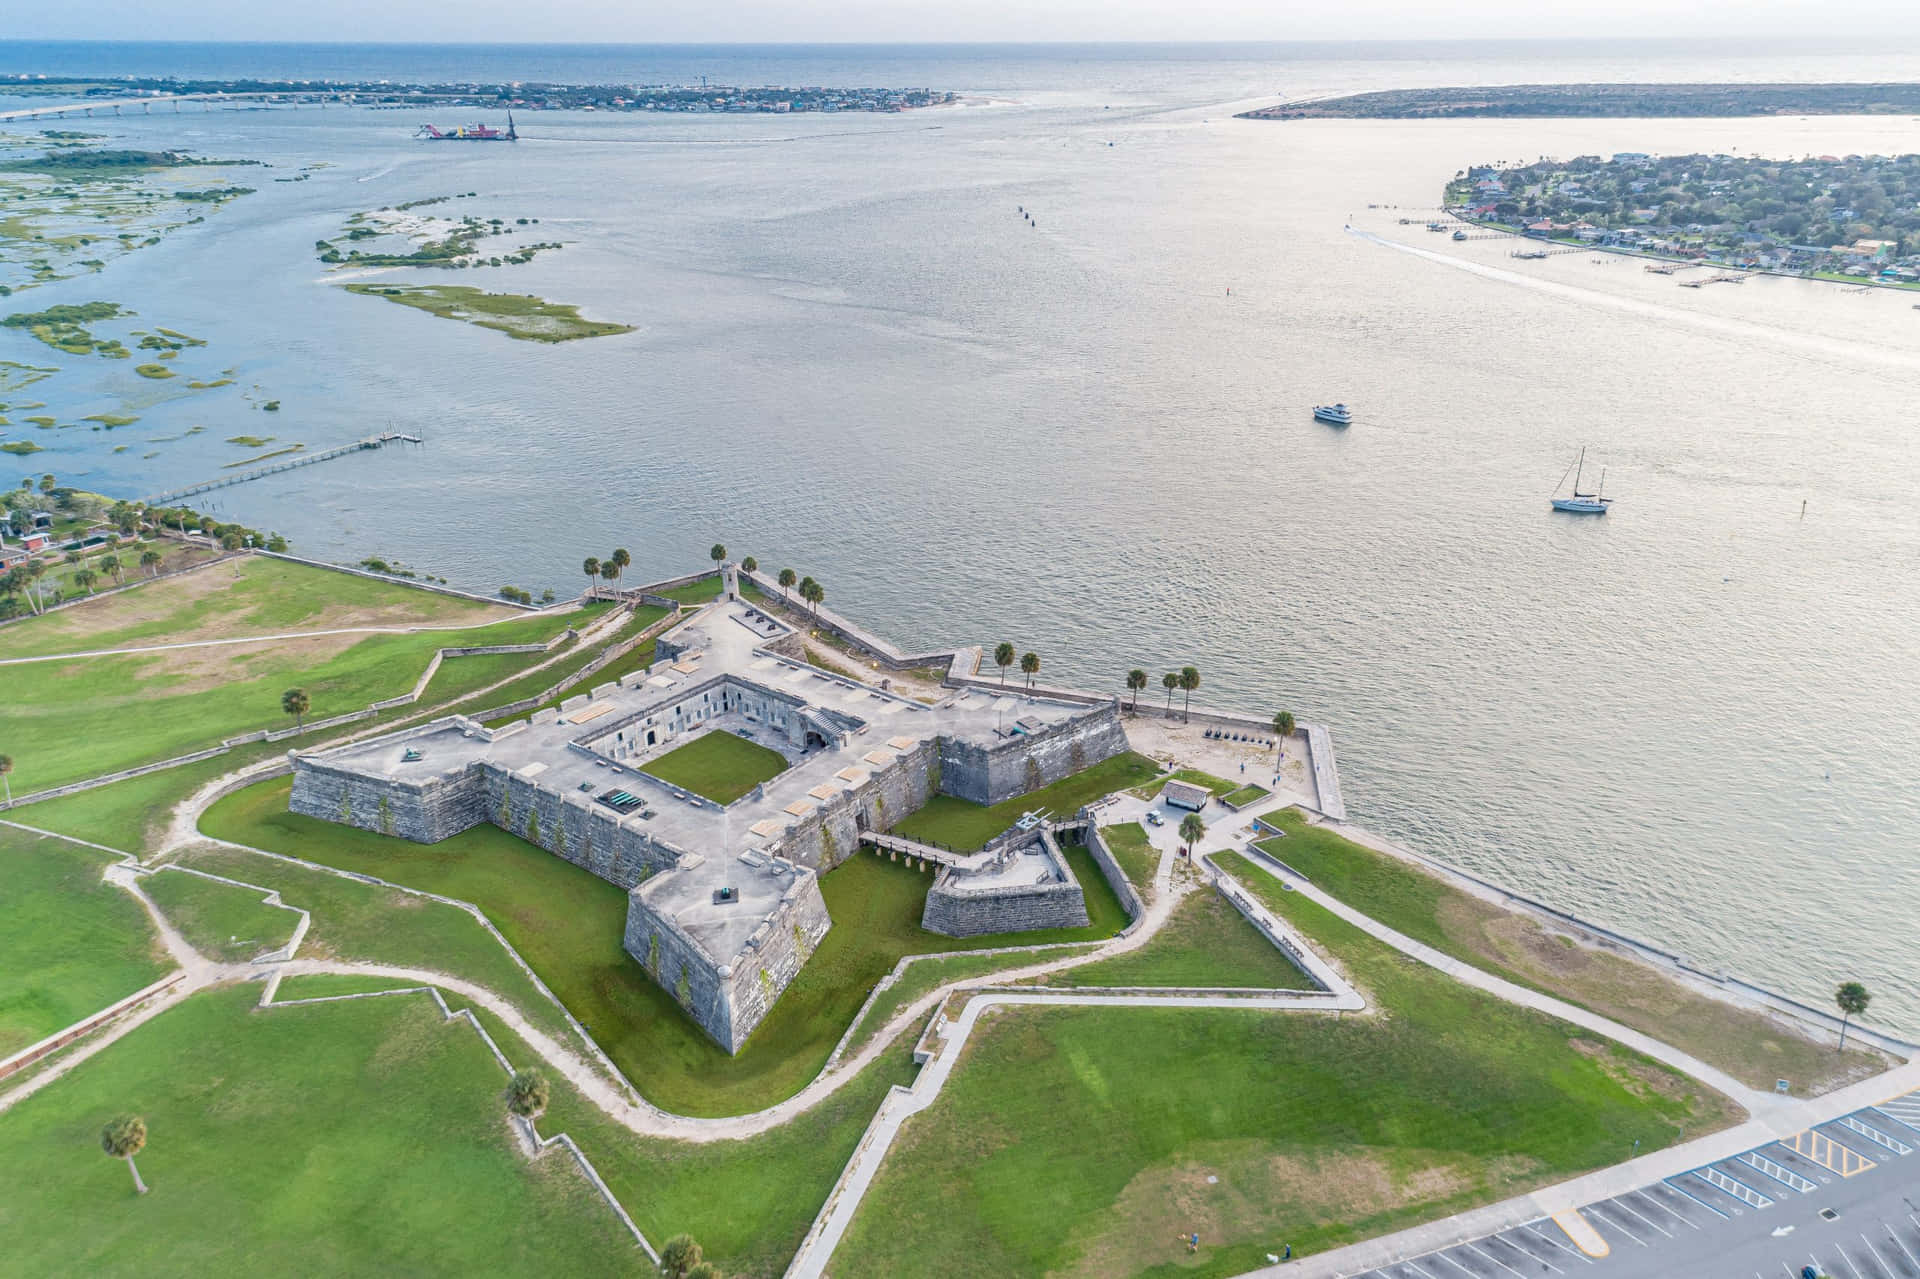 An Aerial View Of A Fort On The Water